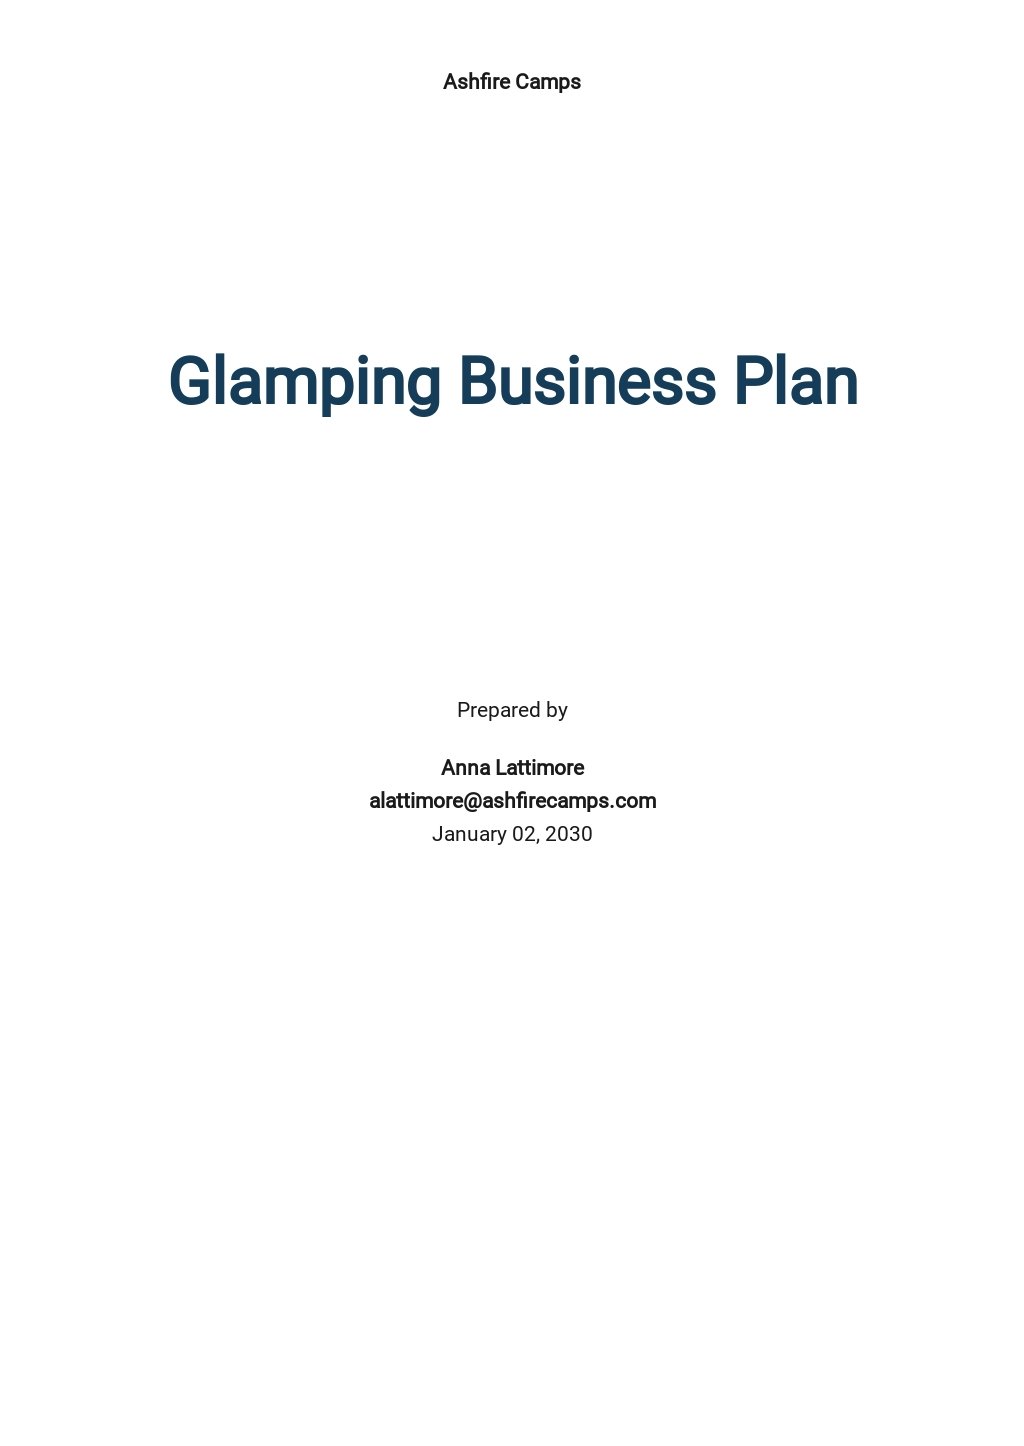 Business Plan Templates in Apple (MAC) Pages